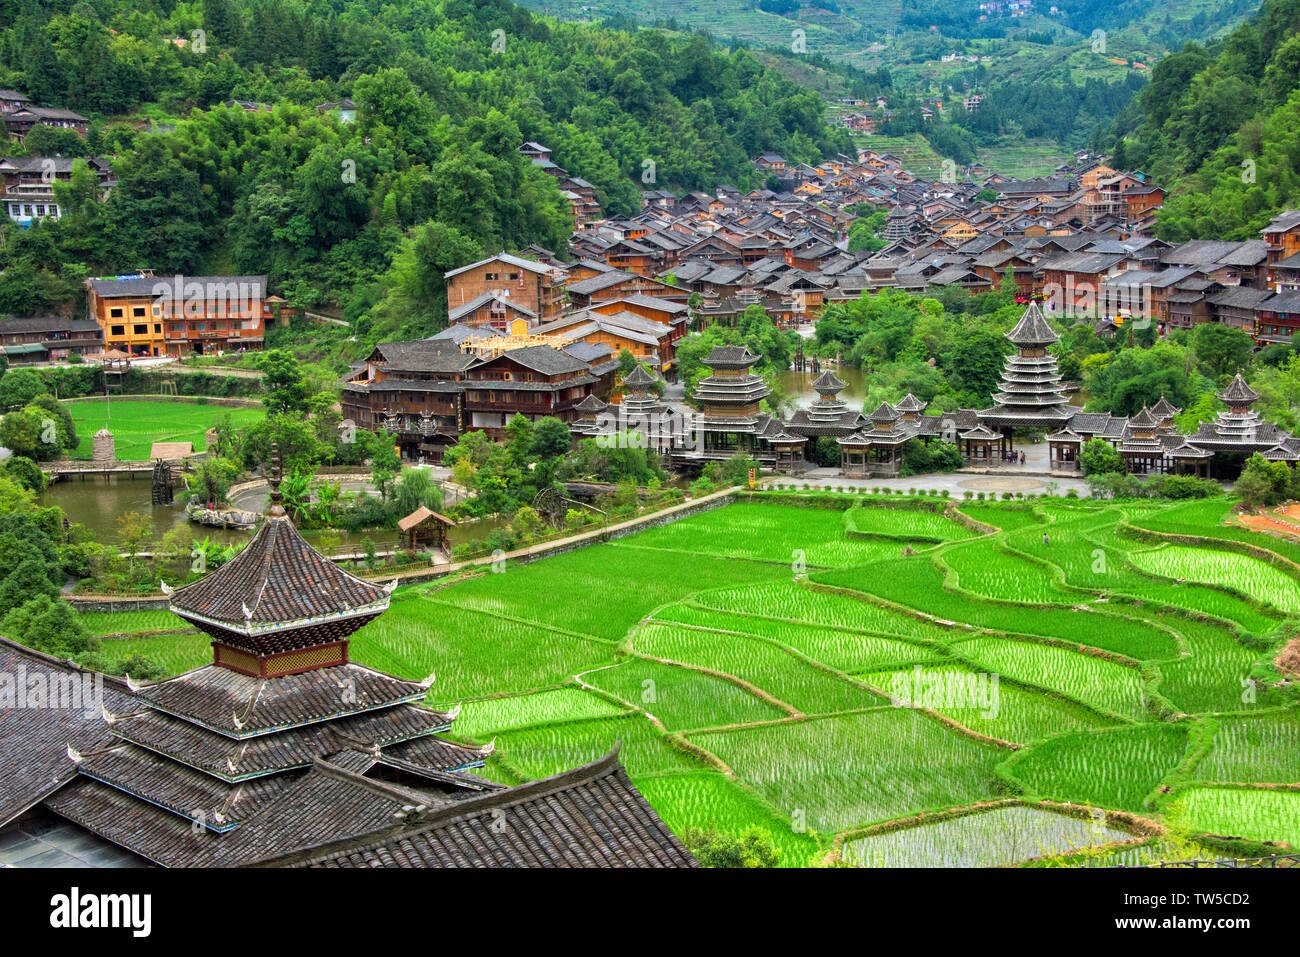 Dong village and rice paddy in the mountain, Zhaoxing, Guizhou Province, China Stock Photo